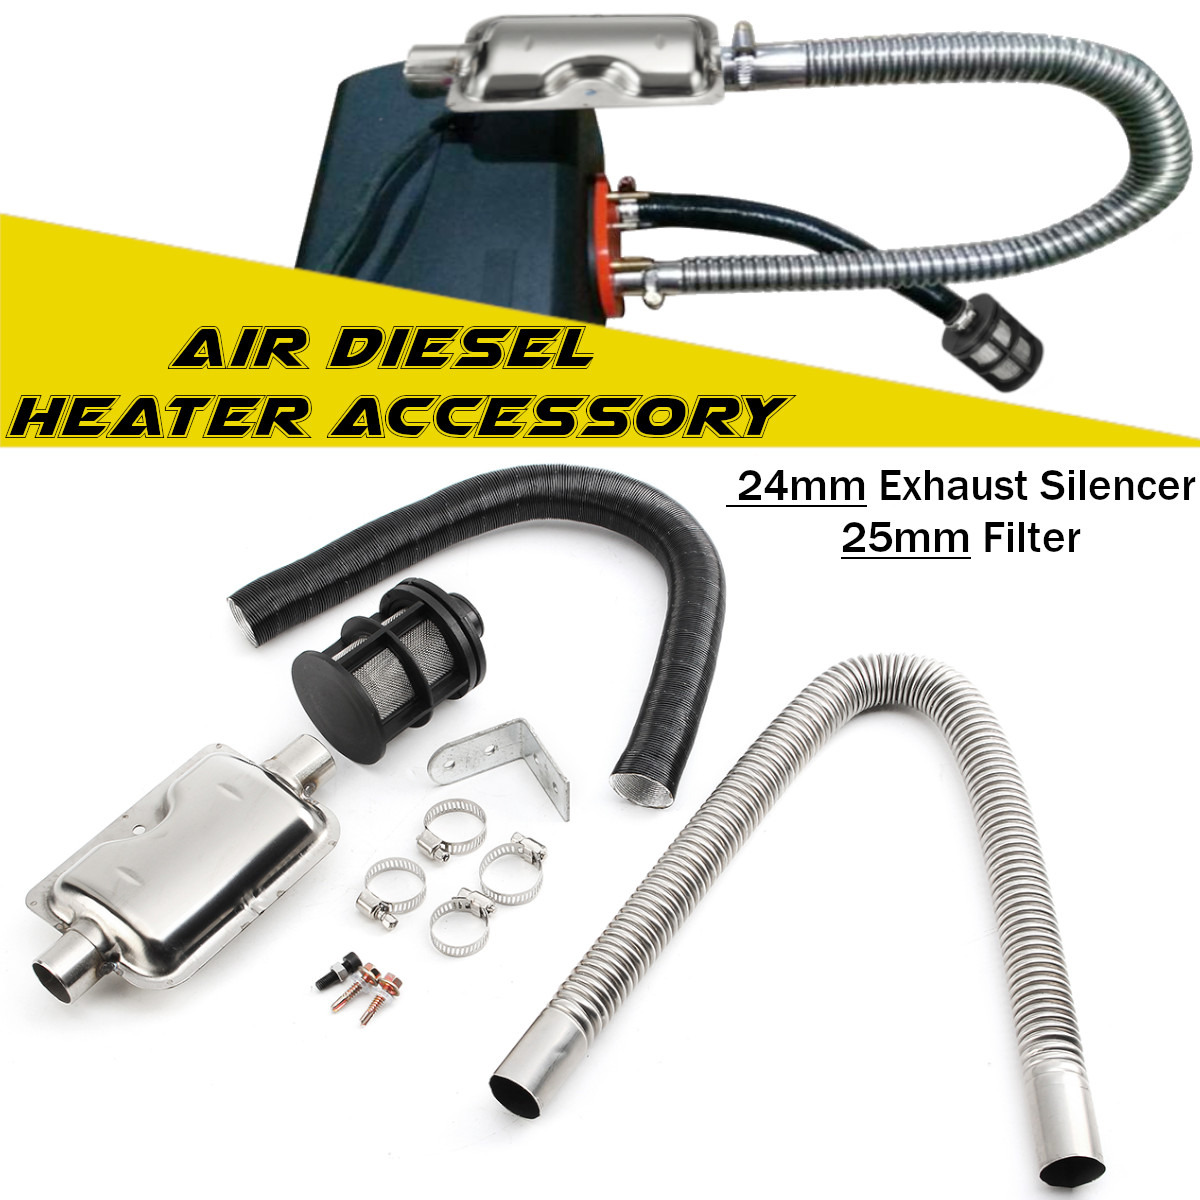 24mm-Exhaust-Silencer--25mm-Filter-Exhaust-and-Intake-Pipe-for-Air-Diesel-Heater-Accessories-1396670-1